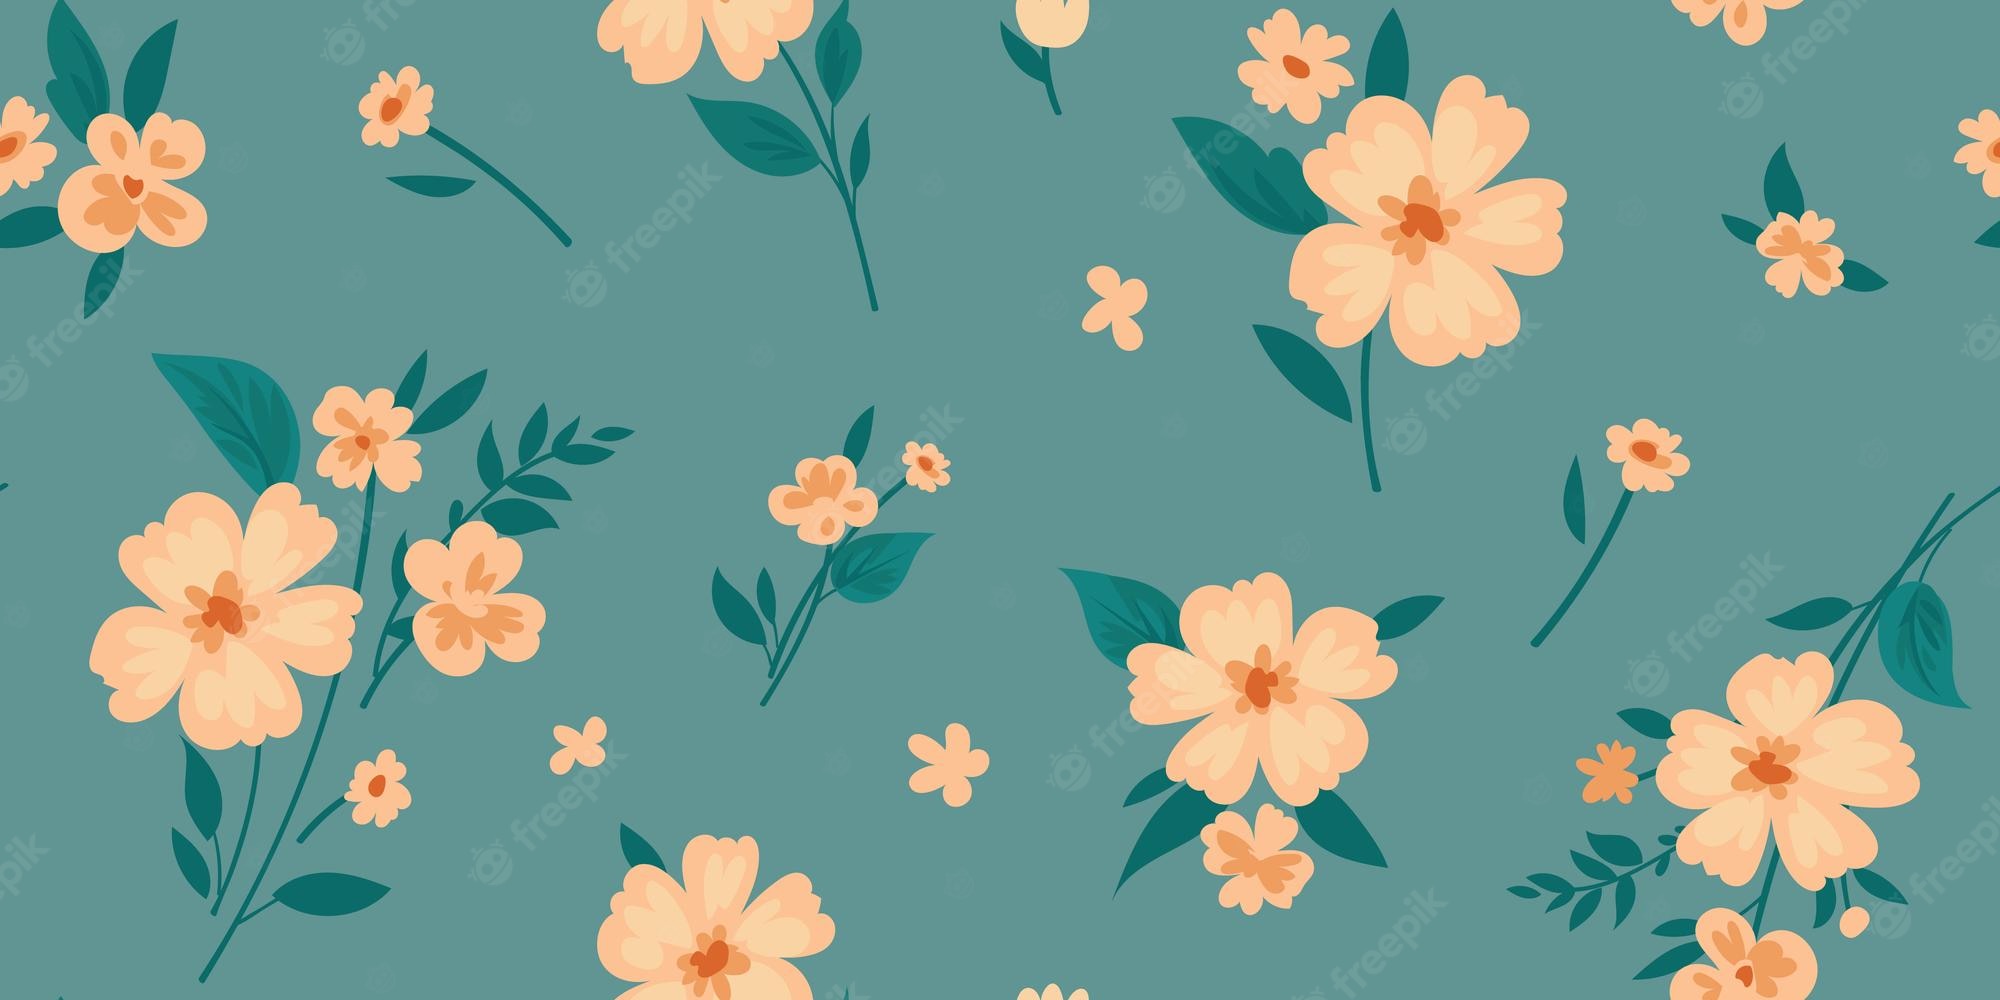 Premium Vector. Pretty summer seamless background with small flowers